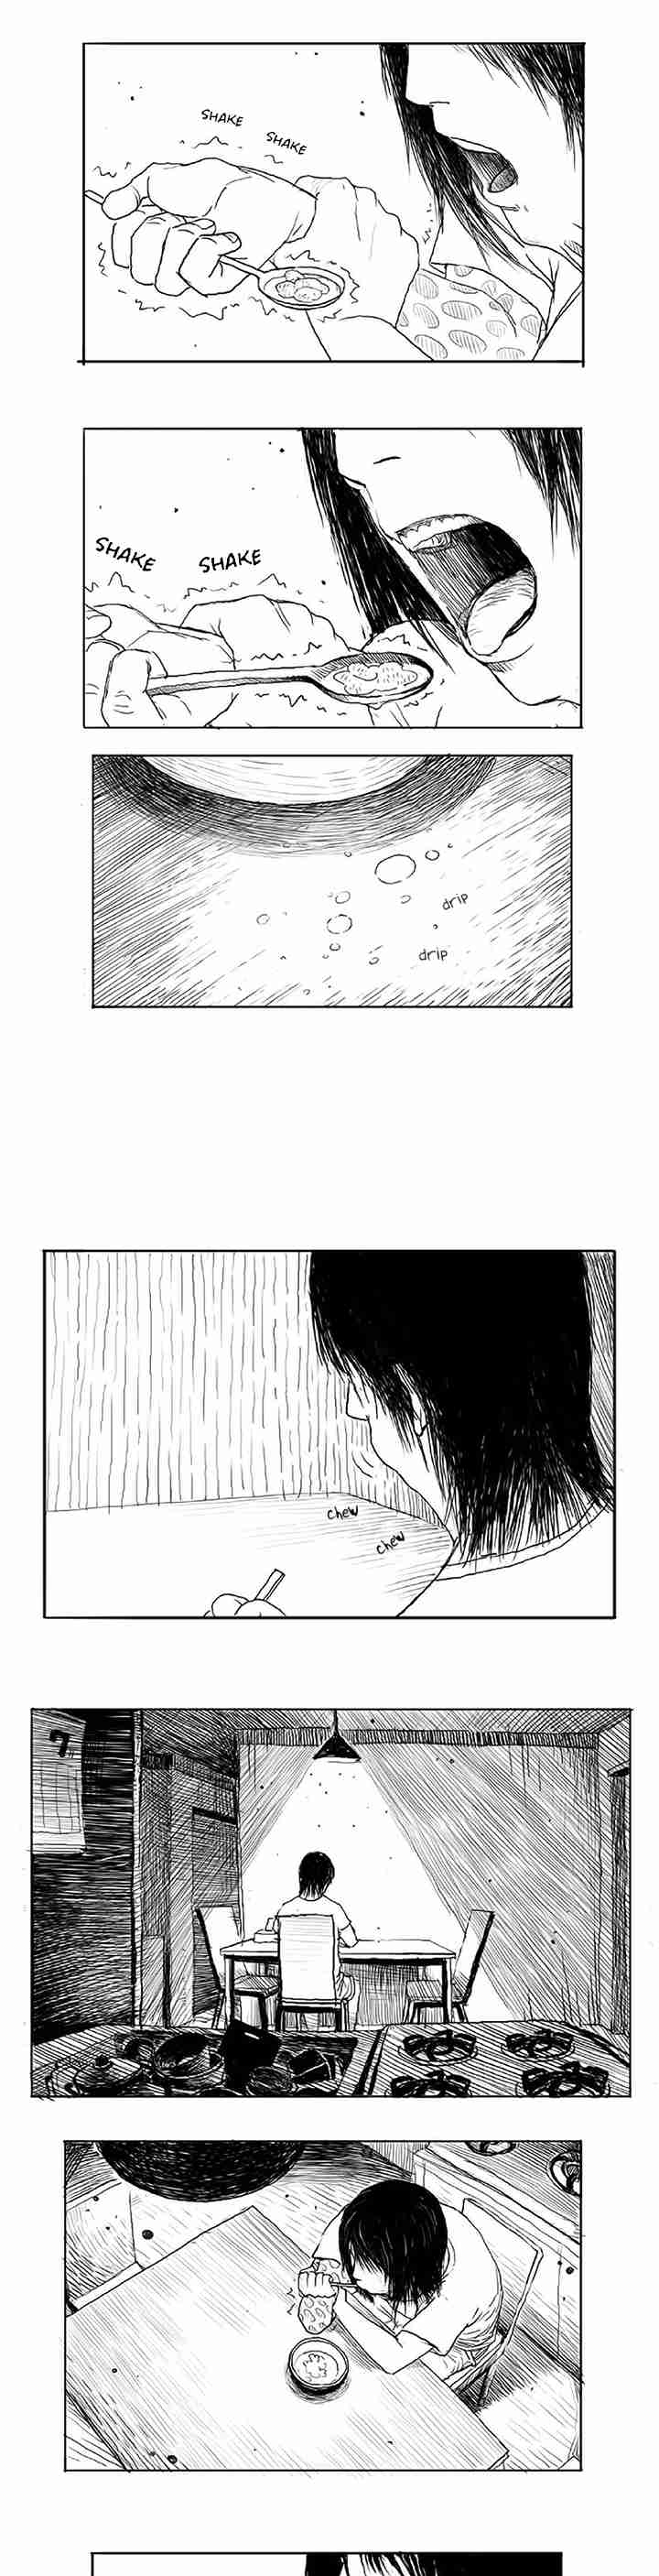 I Have Something to Tell You Vol. 1 Ch. 3 Expectation